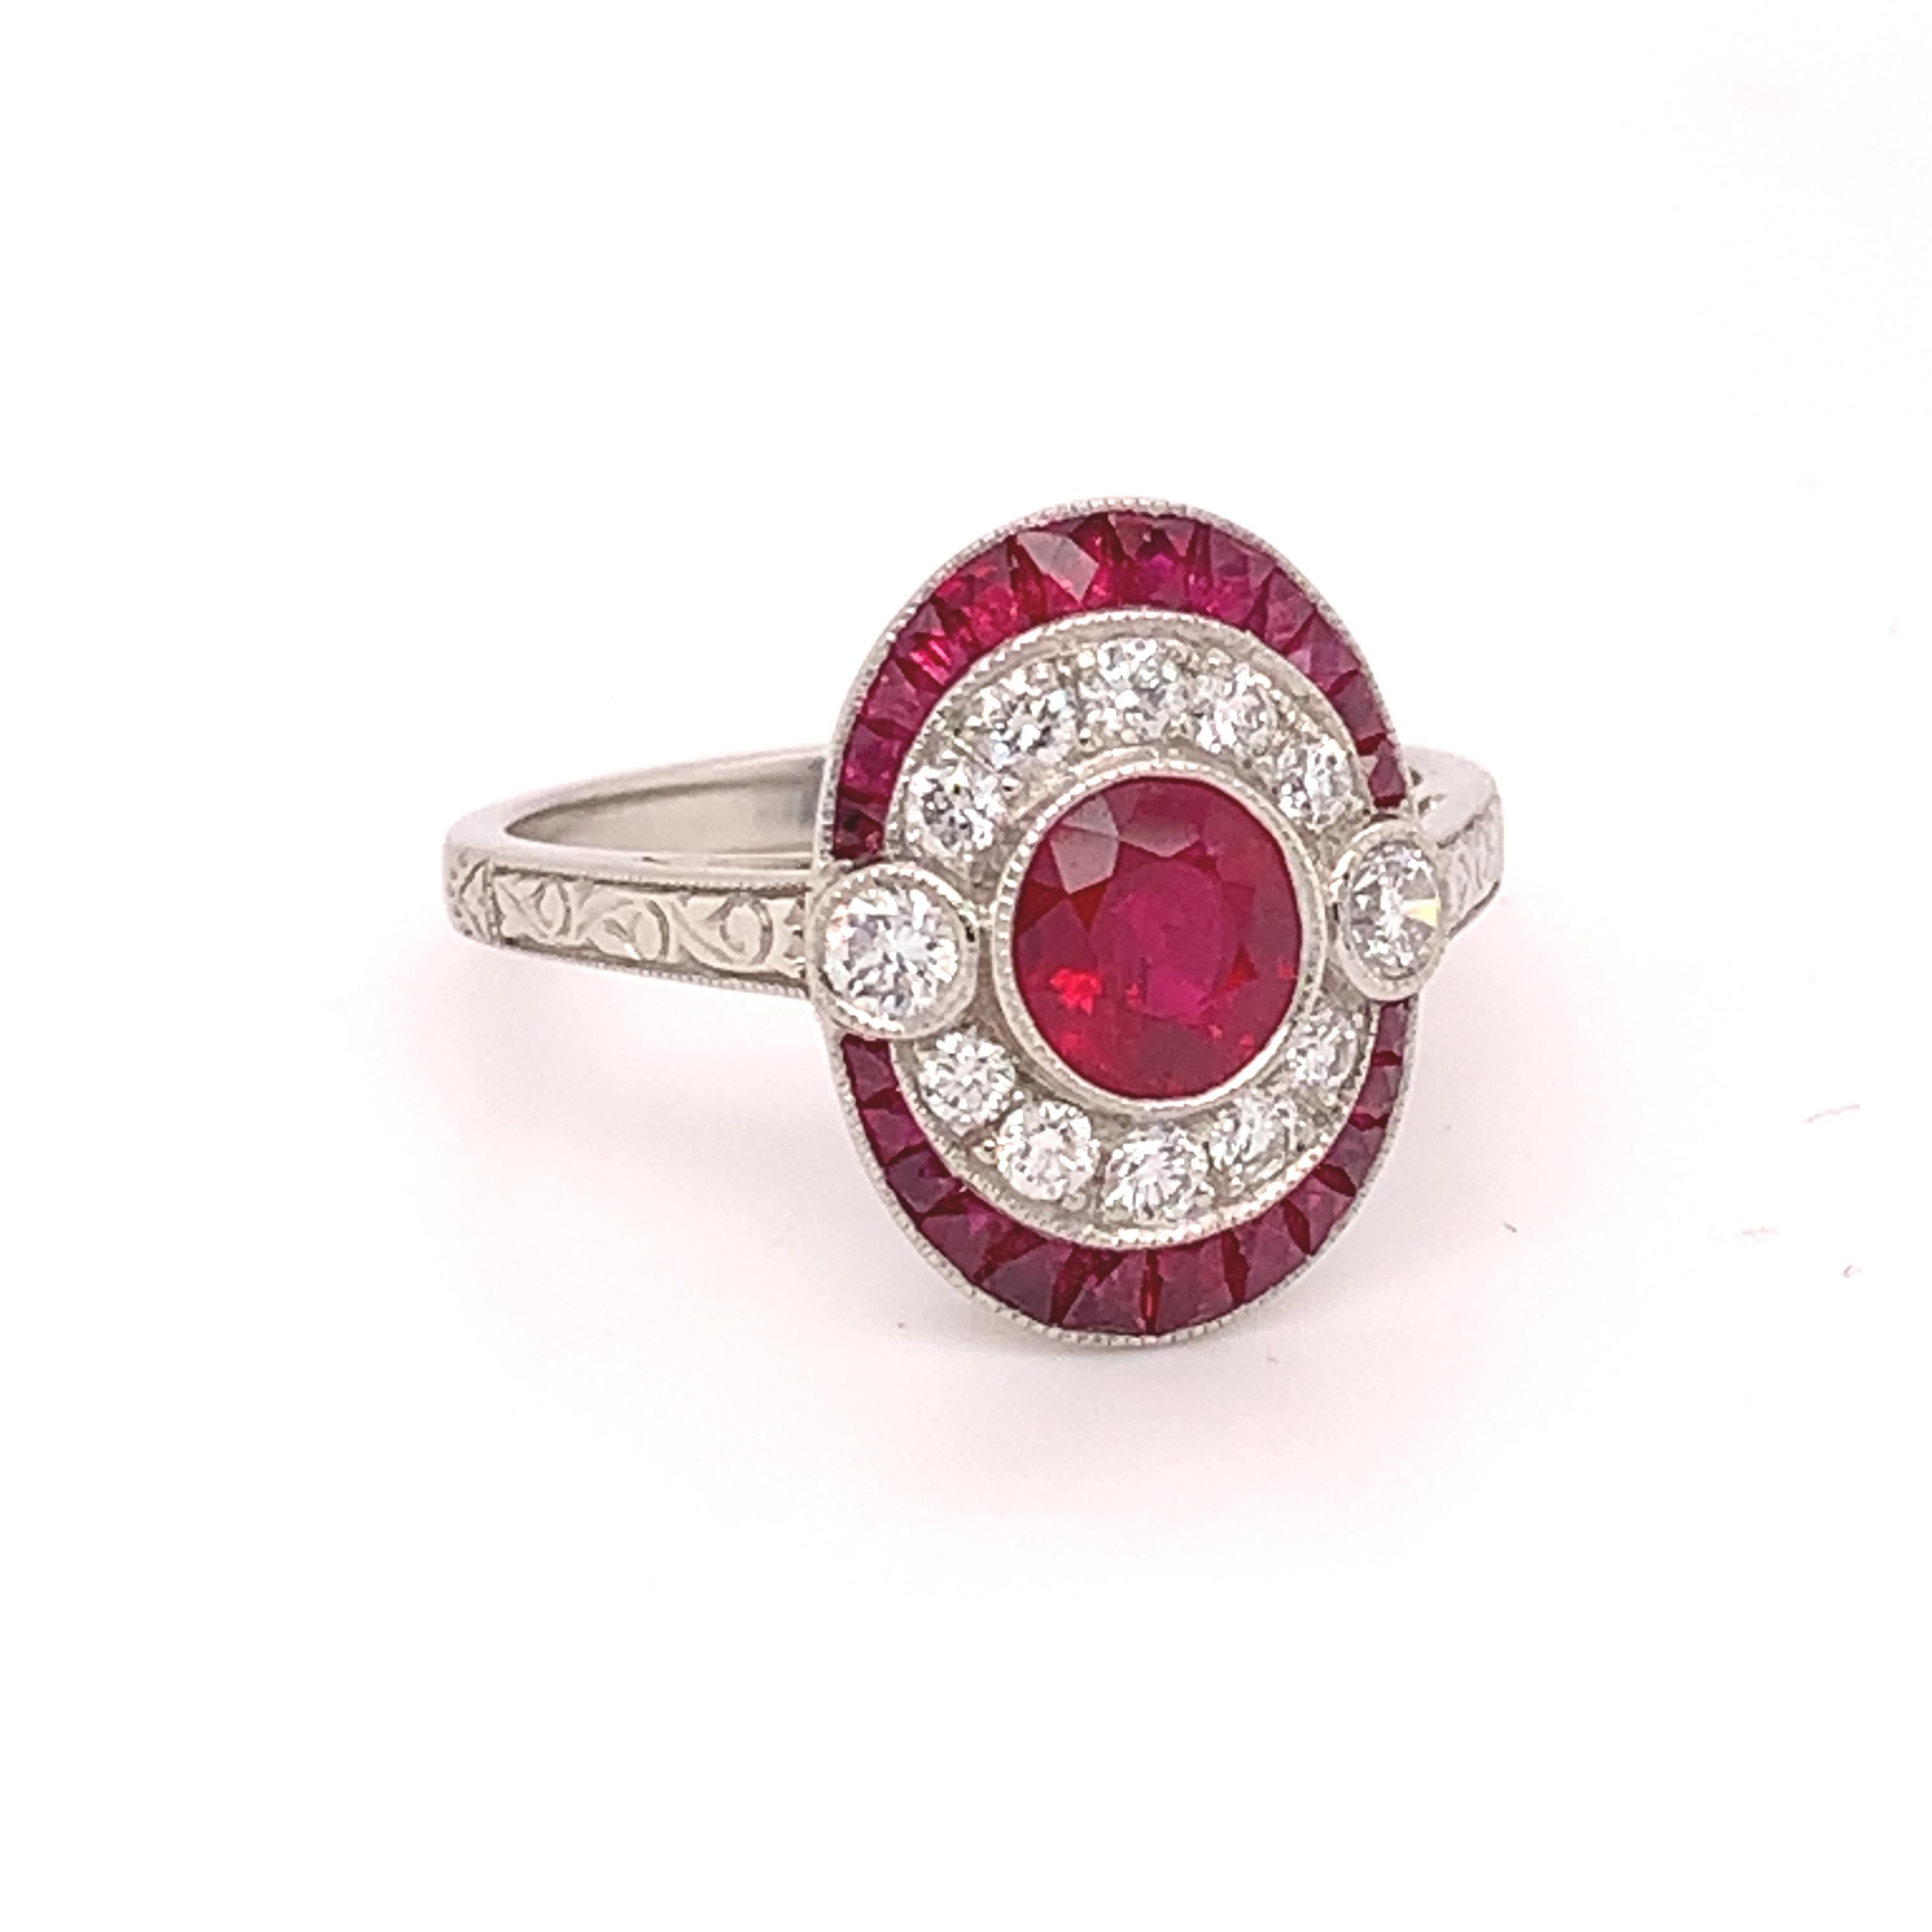 Platinum 1.78ct Genuine Natural Ruby and Diamond Ring (#J4860)

Platinum ruby and diamond ring with specialty cut rubies; over 1 3/4 cts total weight of genuine red earth mined rubies. The center round ruby measures about 5mm and weighs .74cts. The